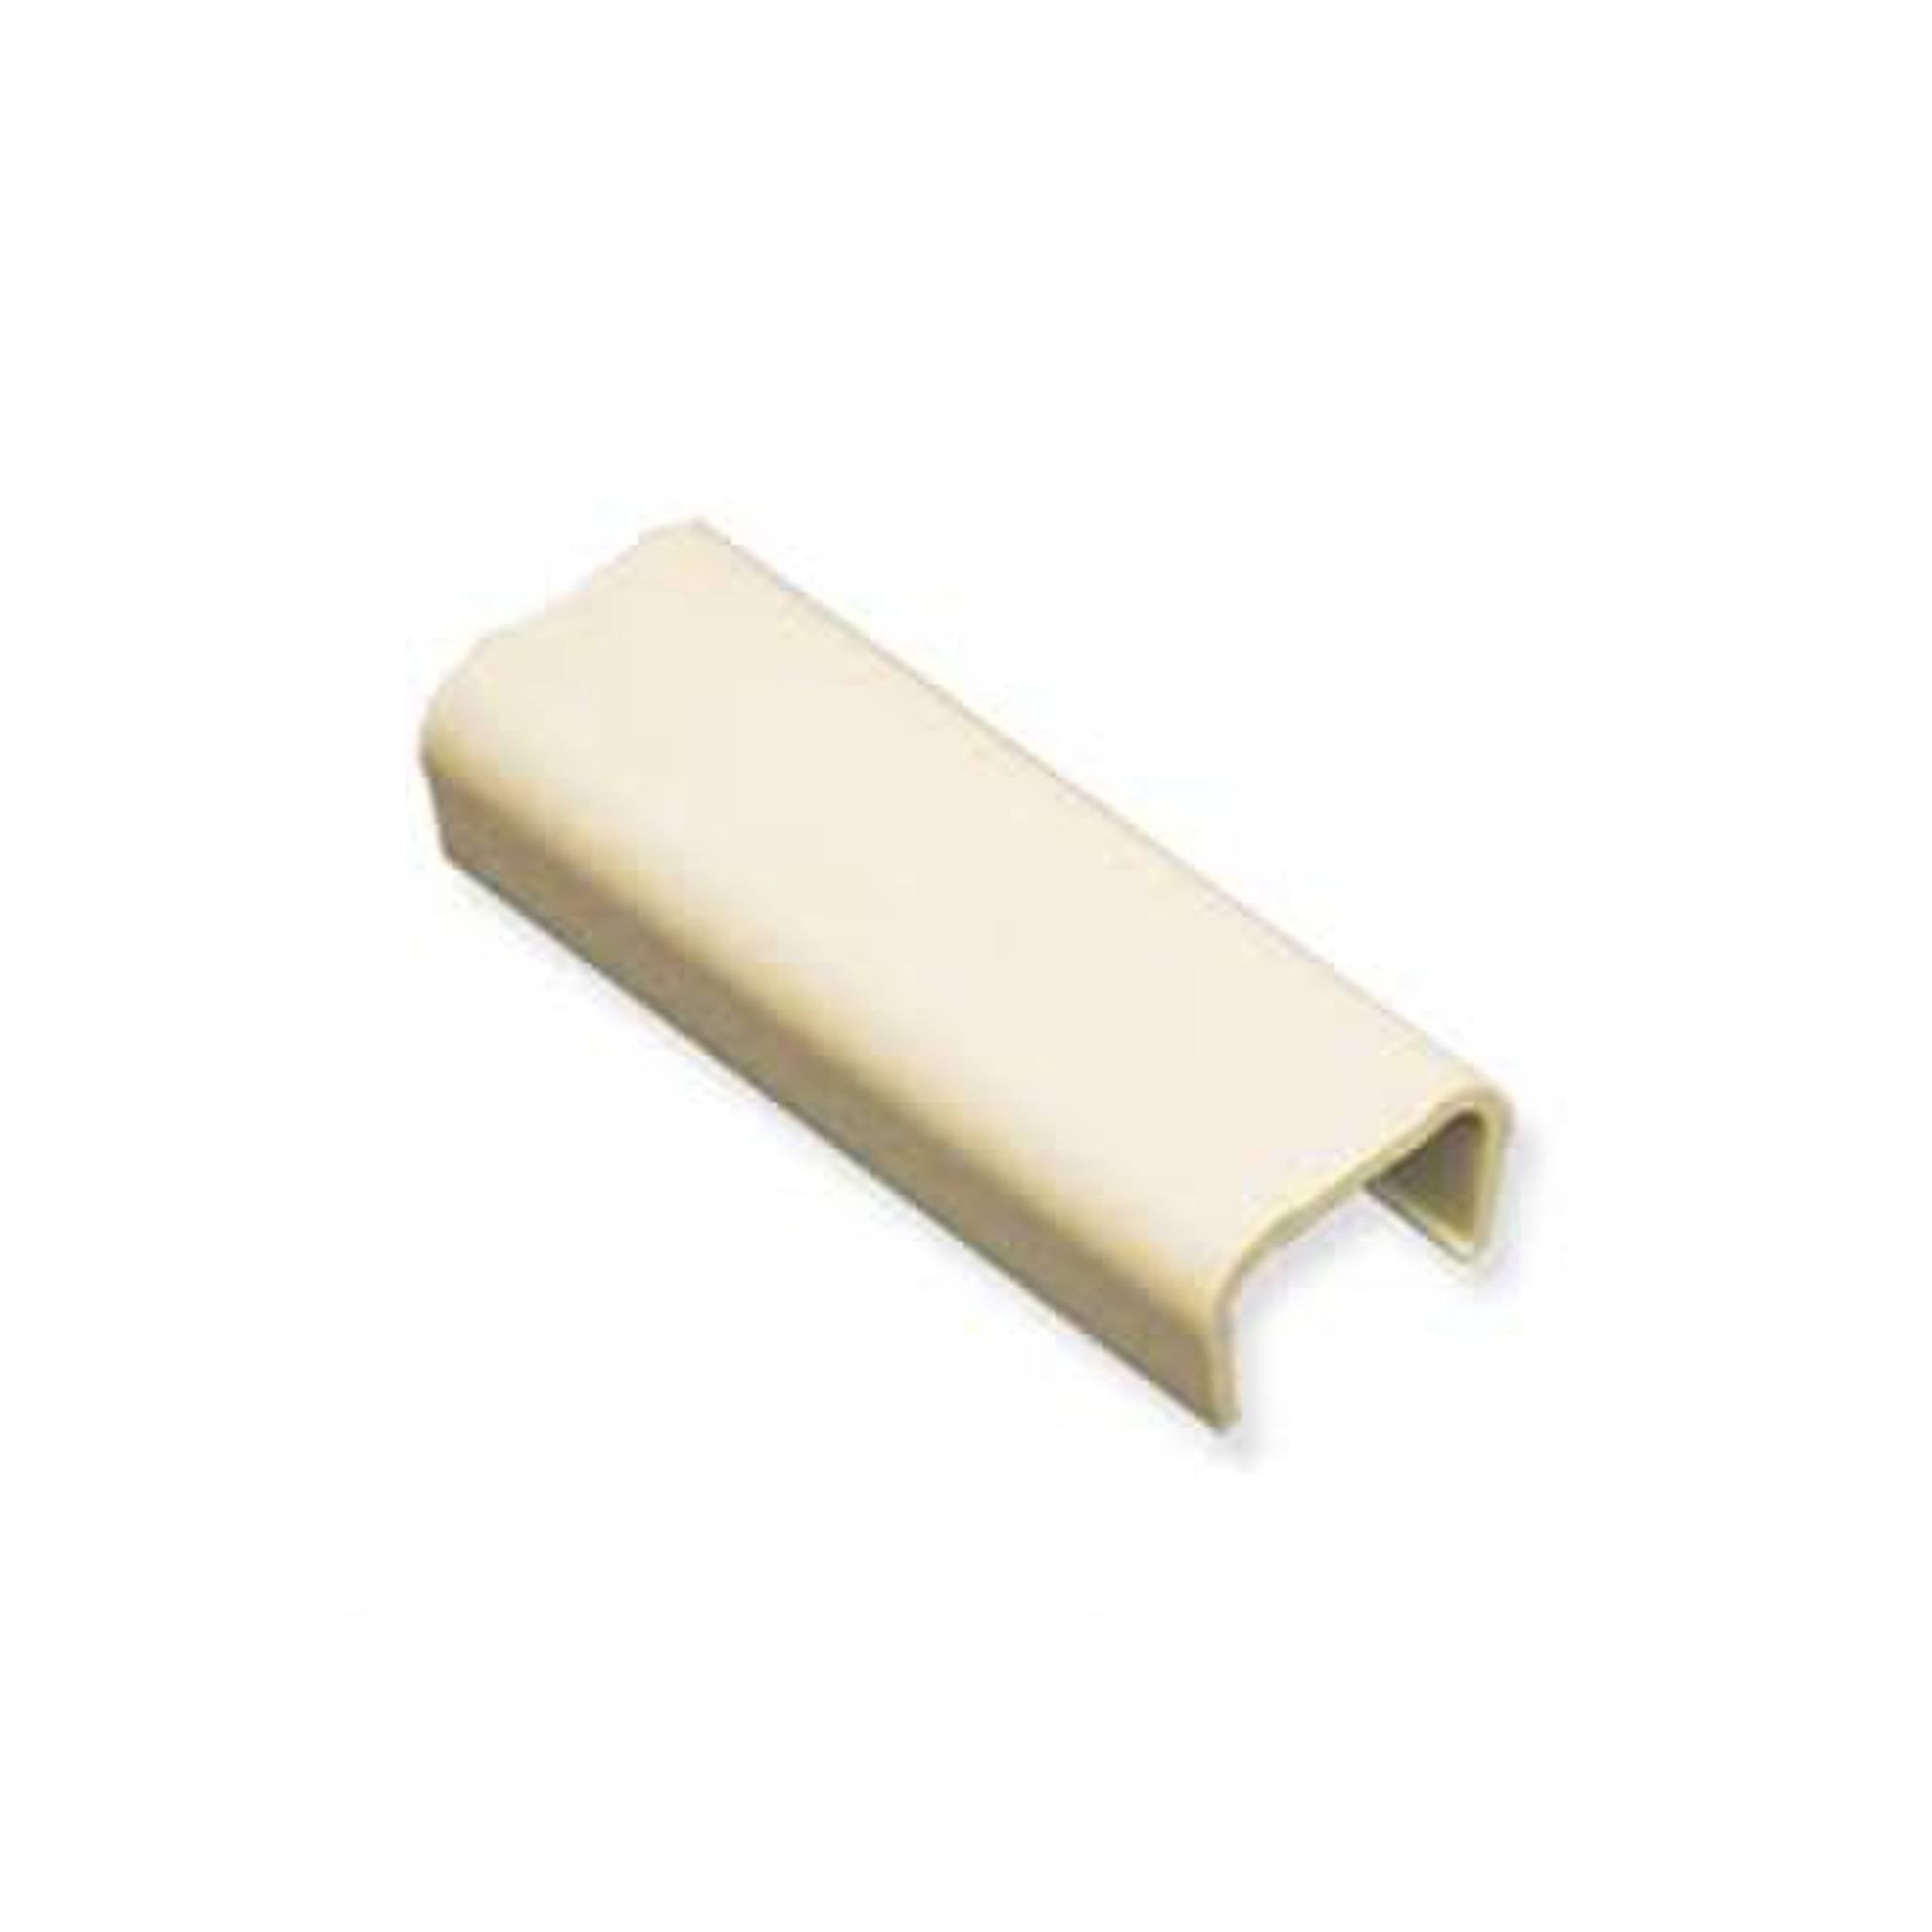 ICC Joint Cover, 1 1/4", Ivory,